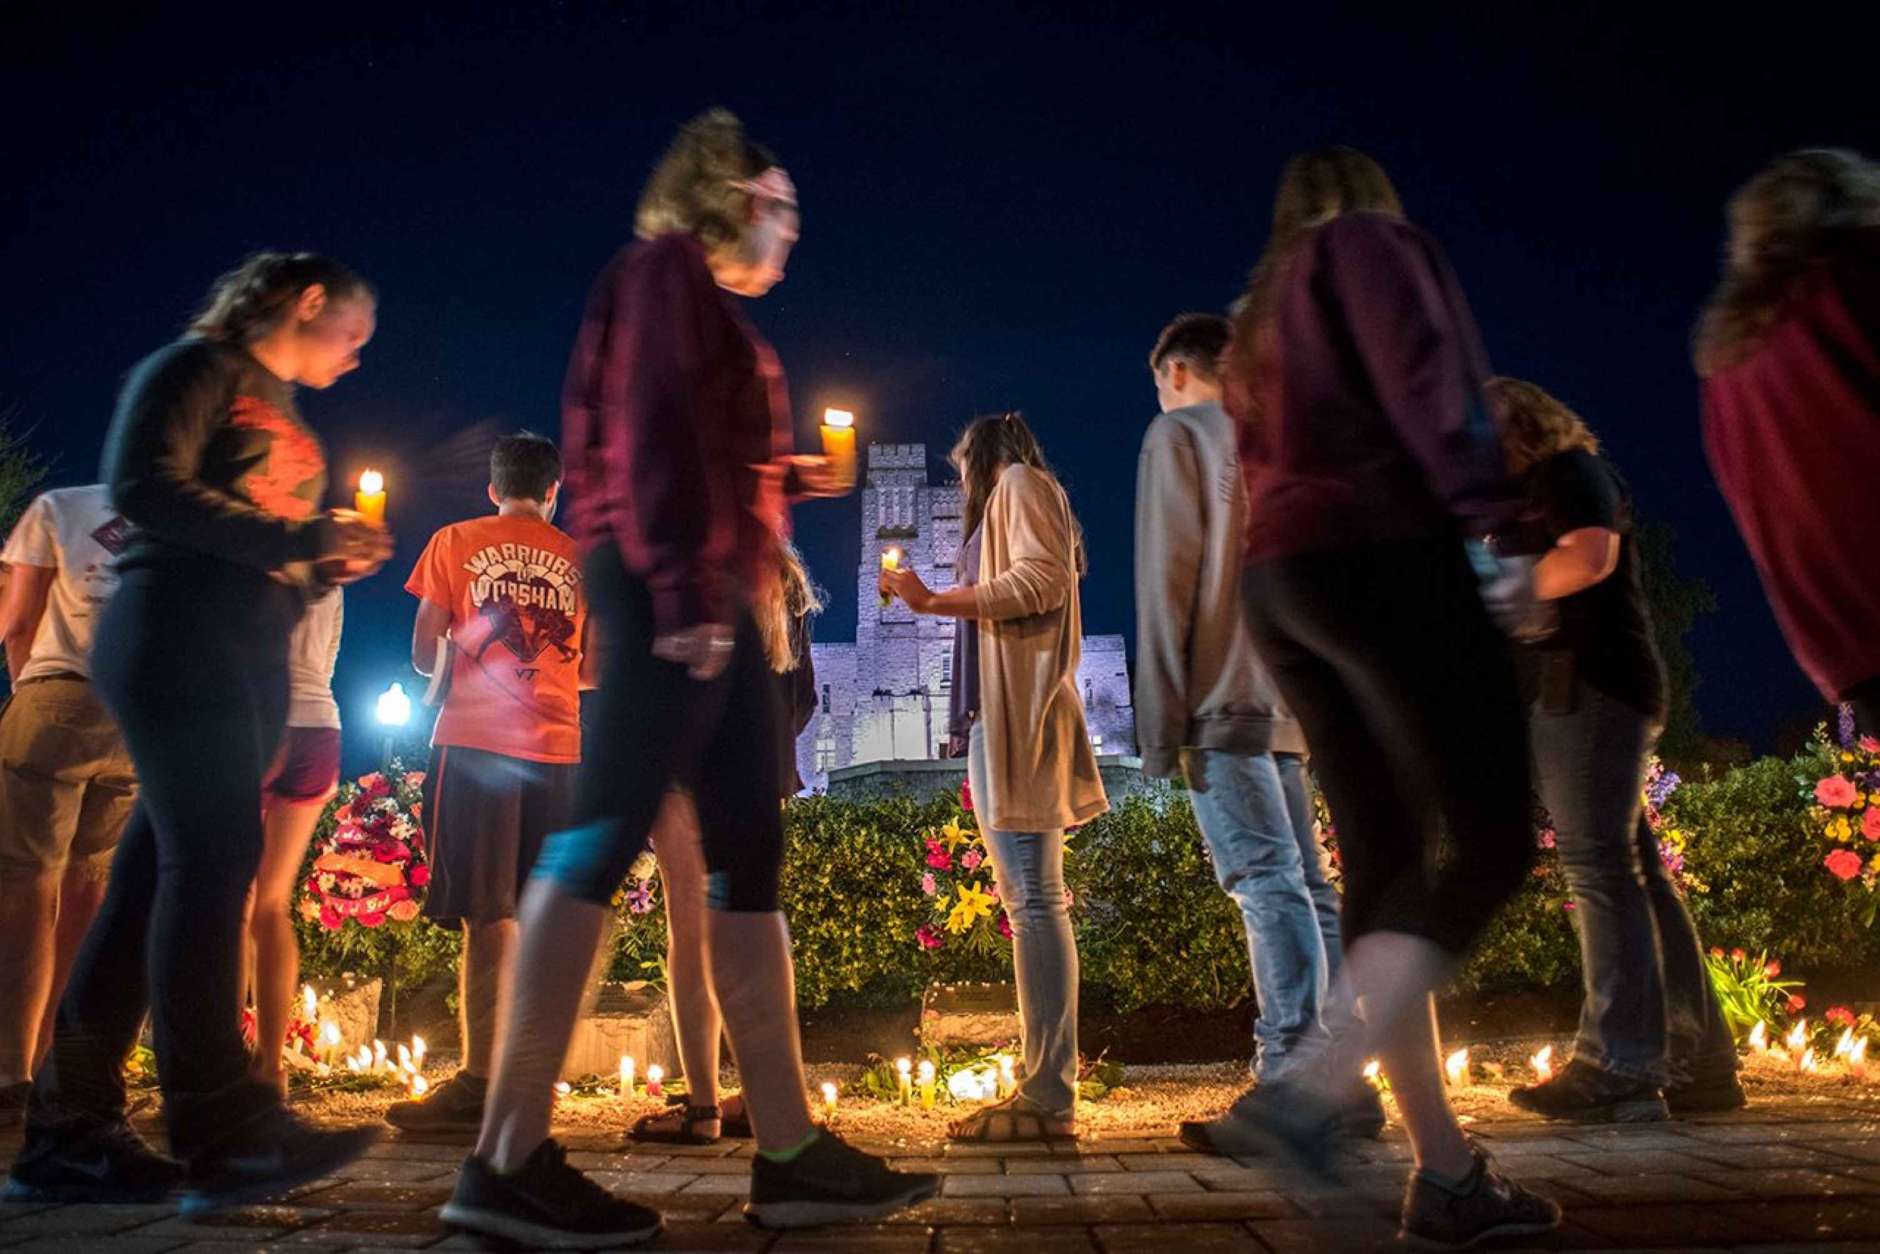 Many who attended the candelight vigil Sunday evening stayed to visit the April 16 Memorial. The vigil was one of many events on campus to mark the 2017 Day of Remembrance. (Courtesy Virginia Tech)